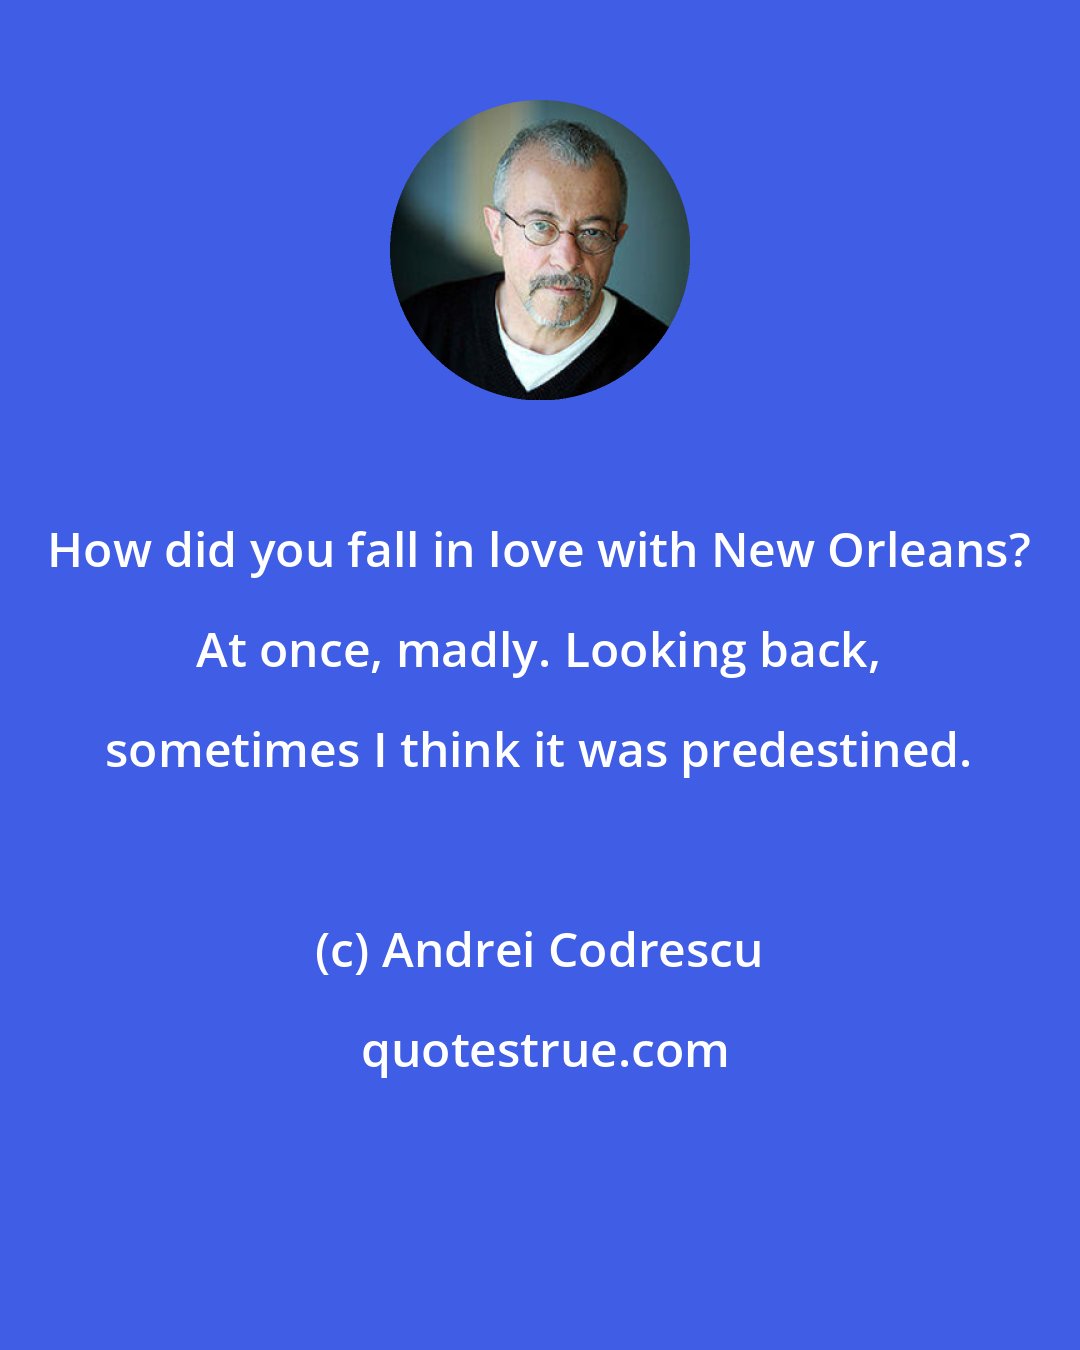 Andrei Codrescu: How did you fall in love with New Orleans? At once, madly. Looking back, sometimes I think it was predestined.